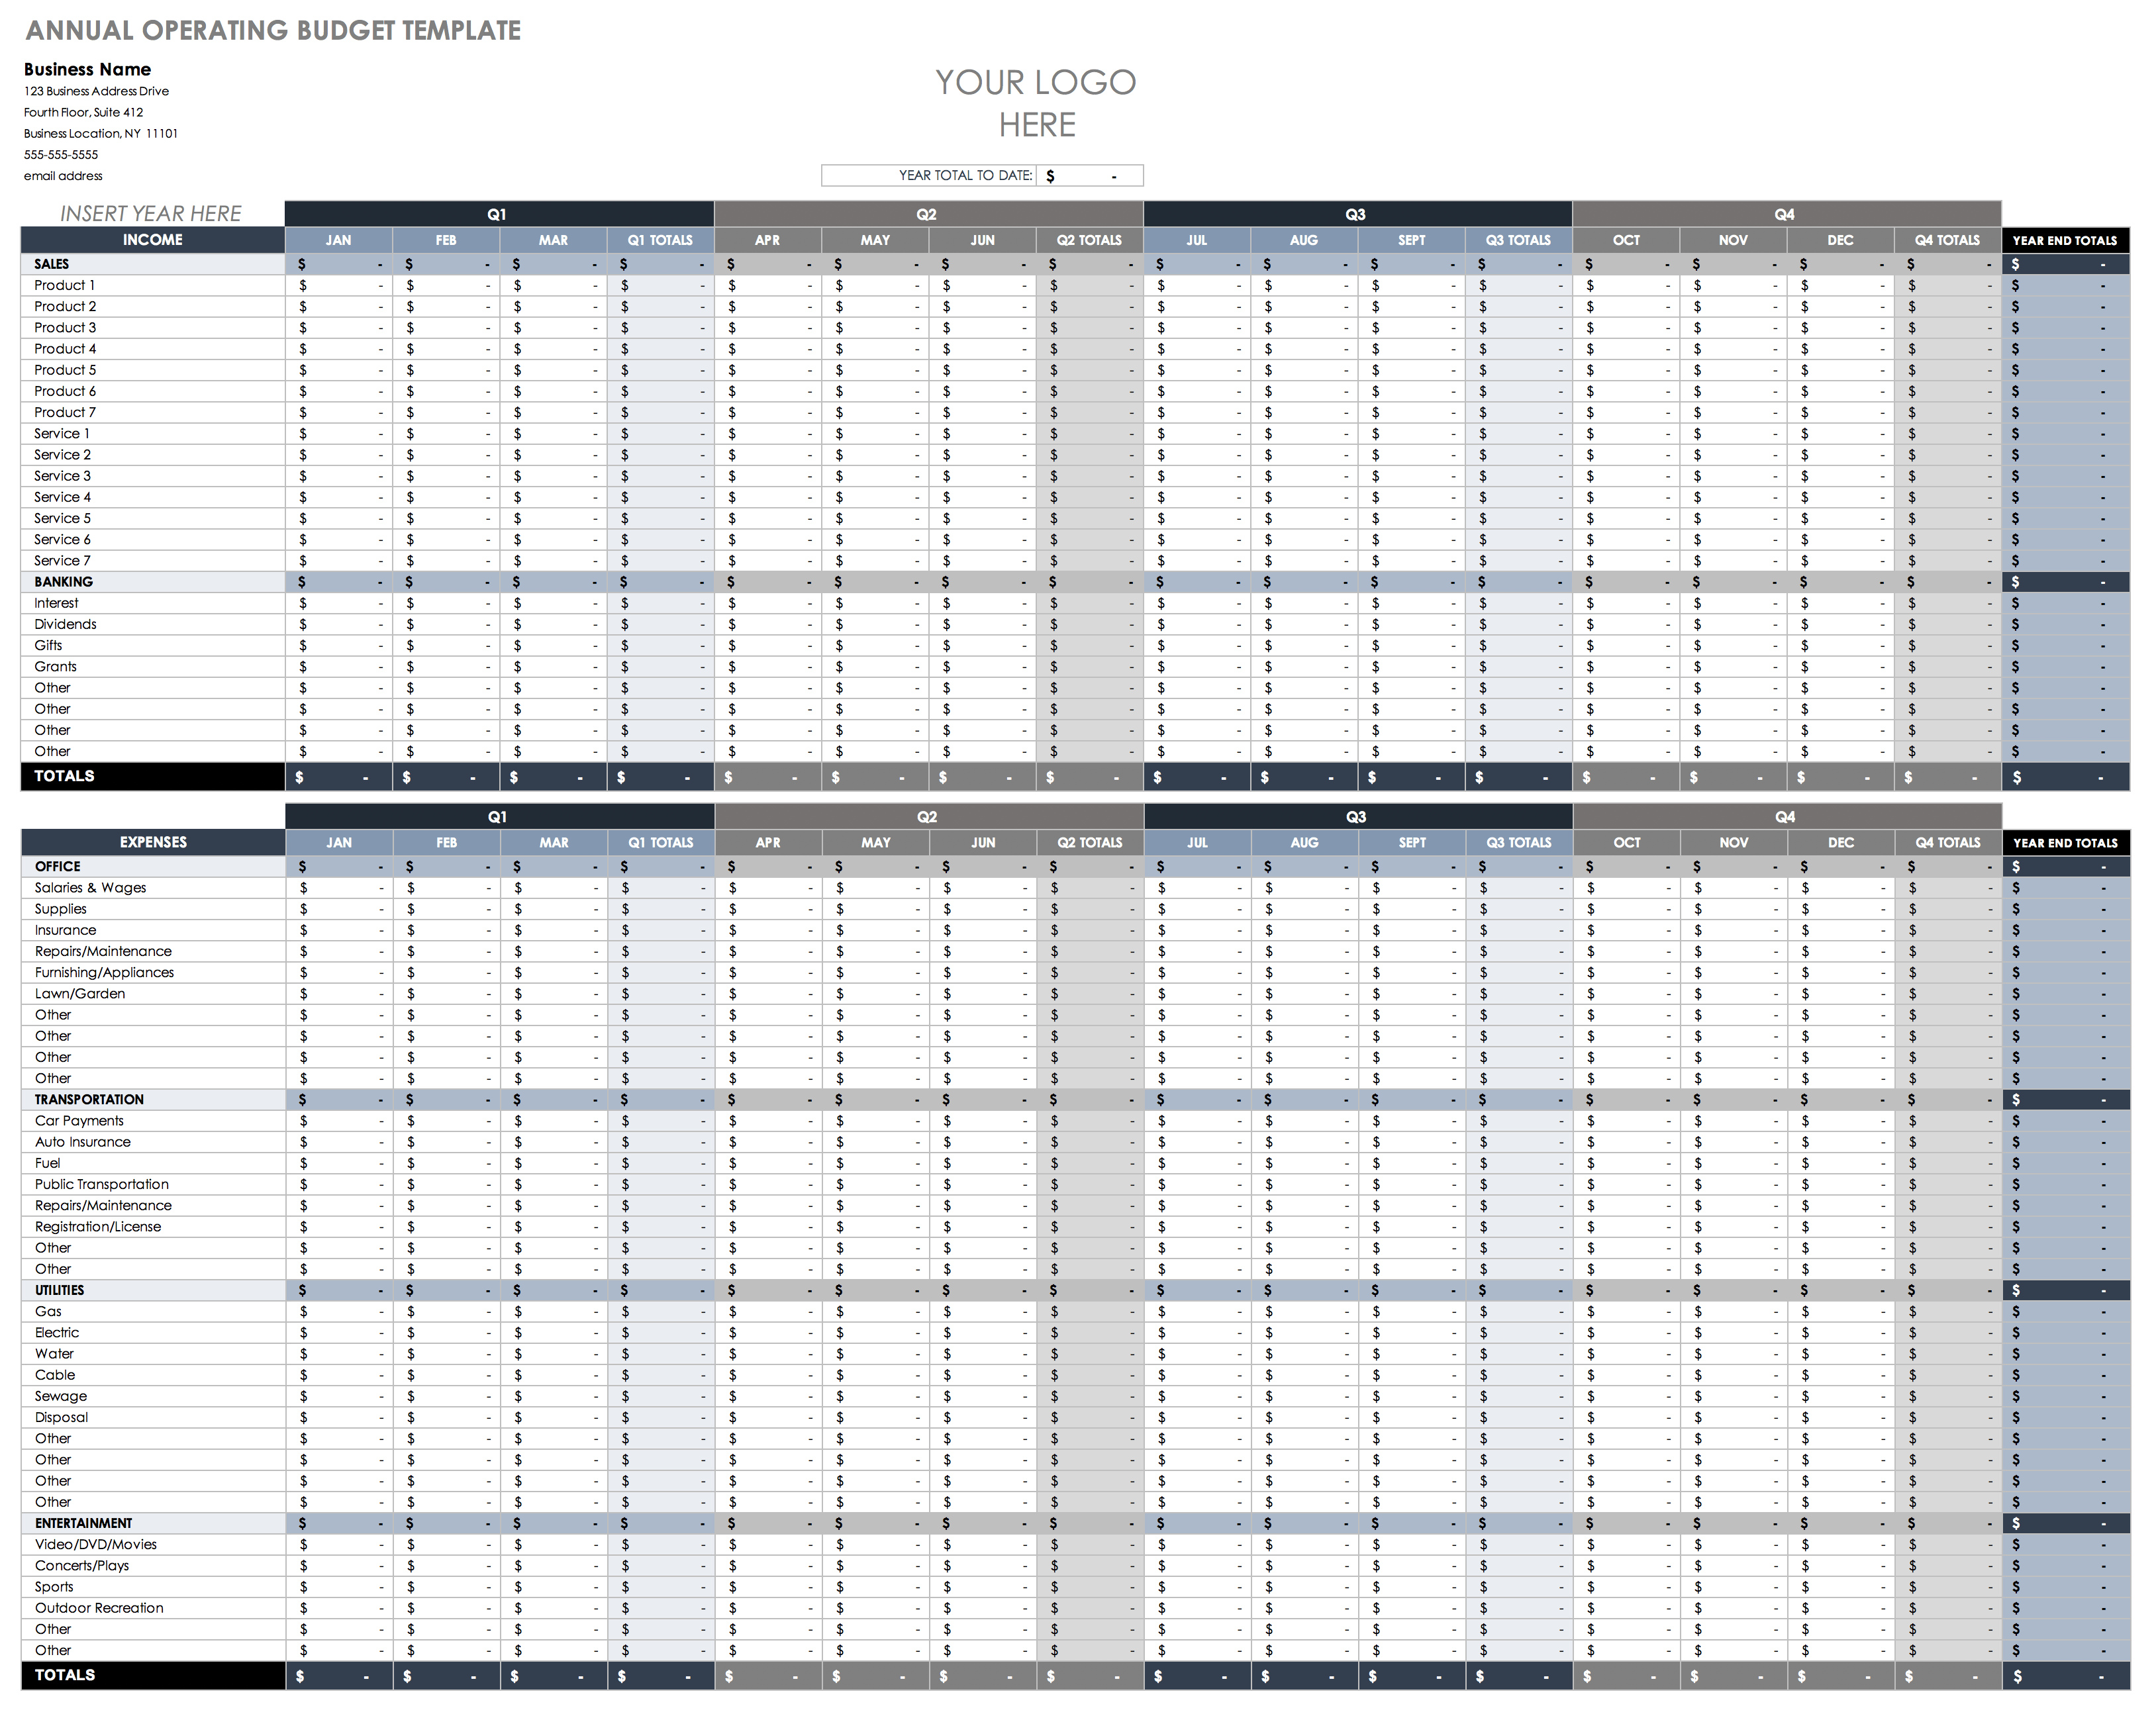 excel fiscal year project planner workbook